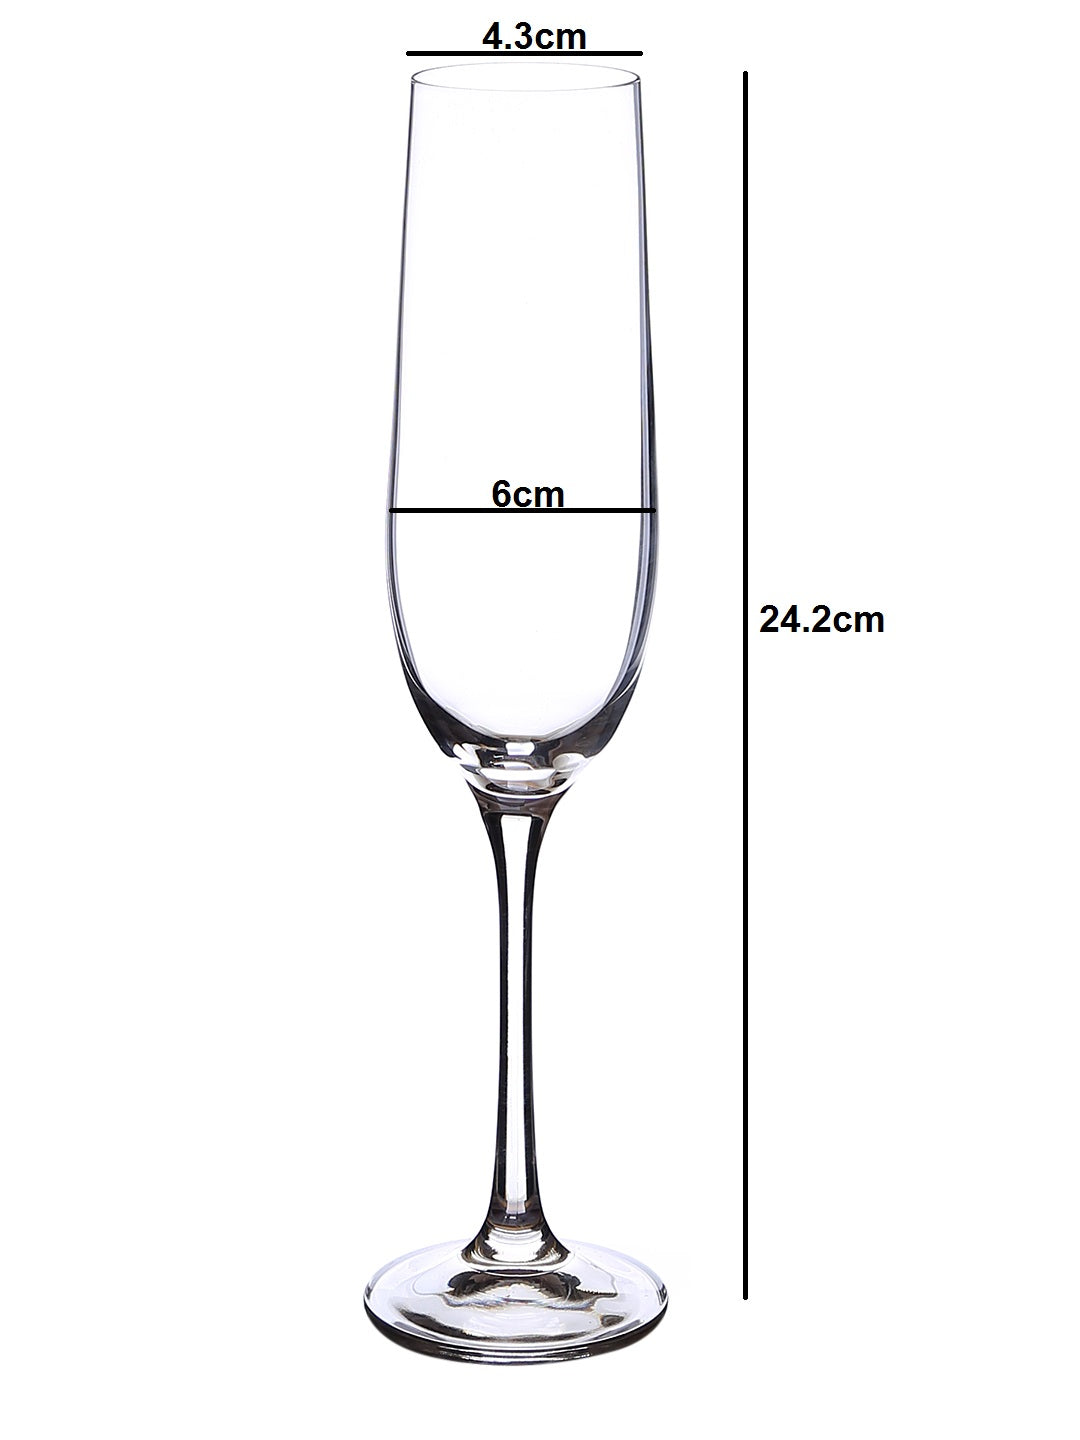 Dimensions of a Luxurious champagne glass perfect for celebrations